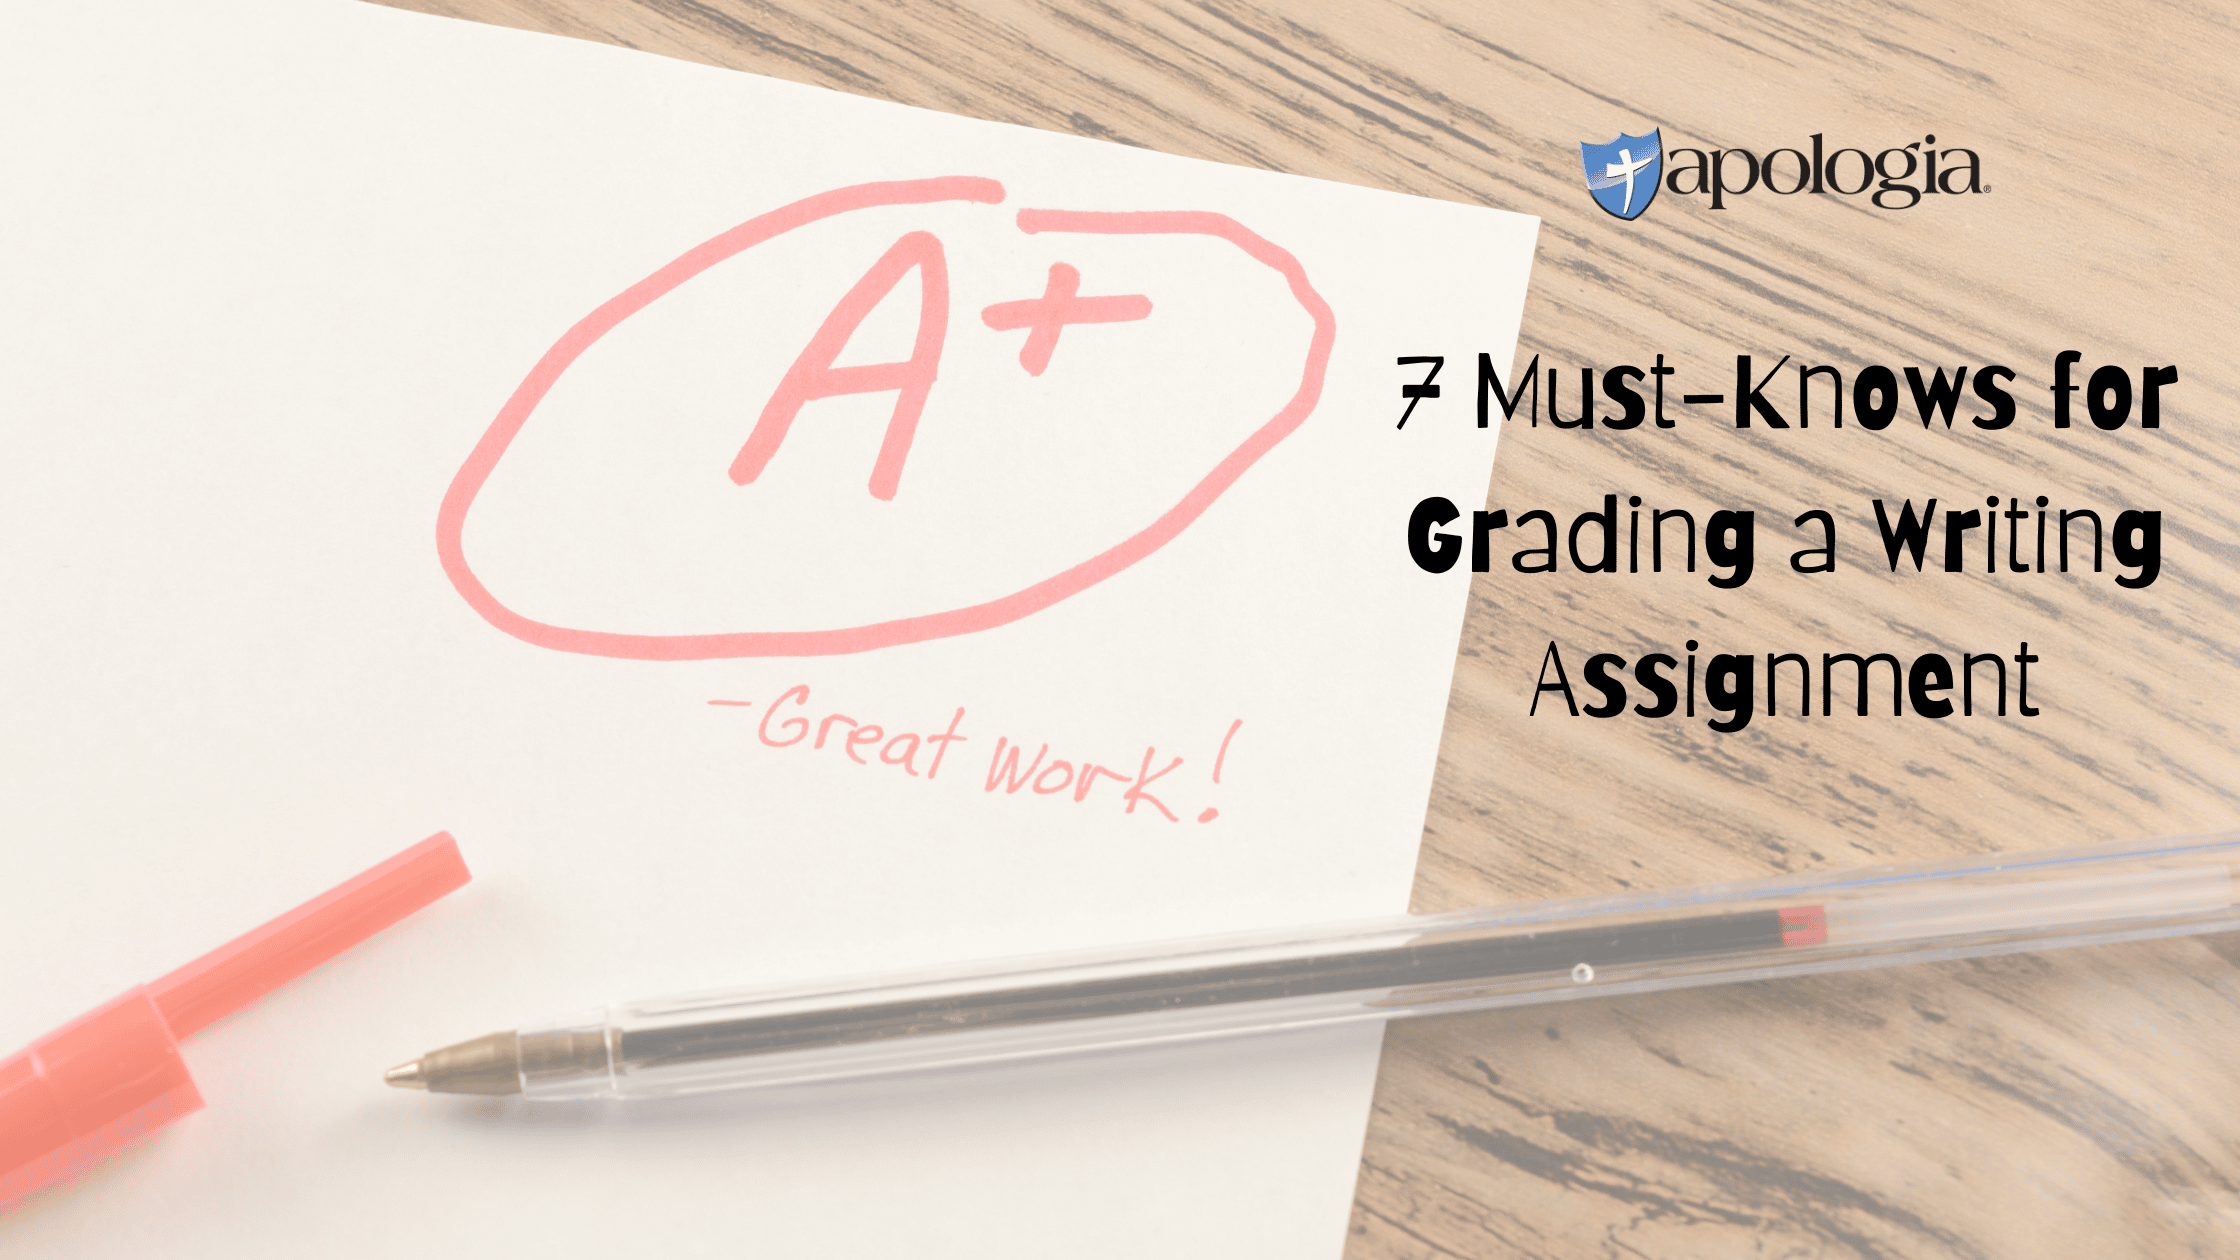 7 Must-Knows for Grading a Writing Assignment